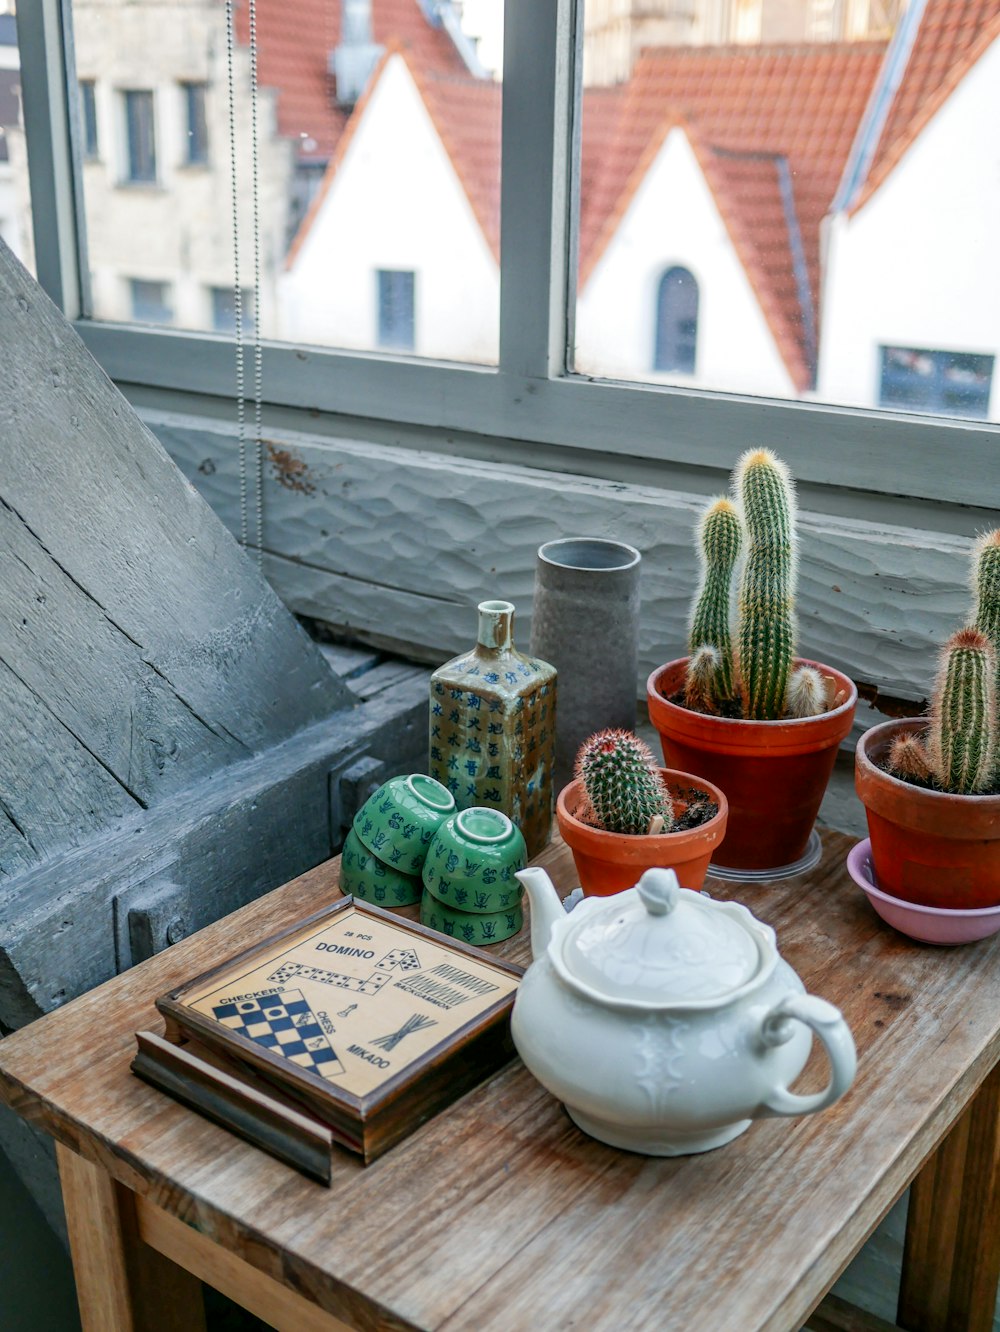 a wooden table topped with potted plants next to a window